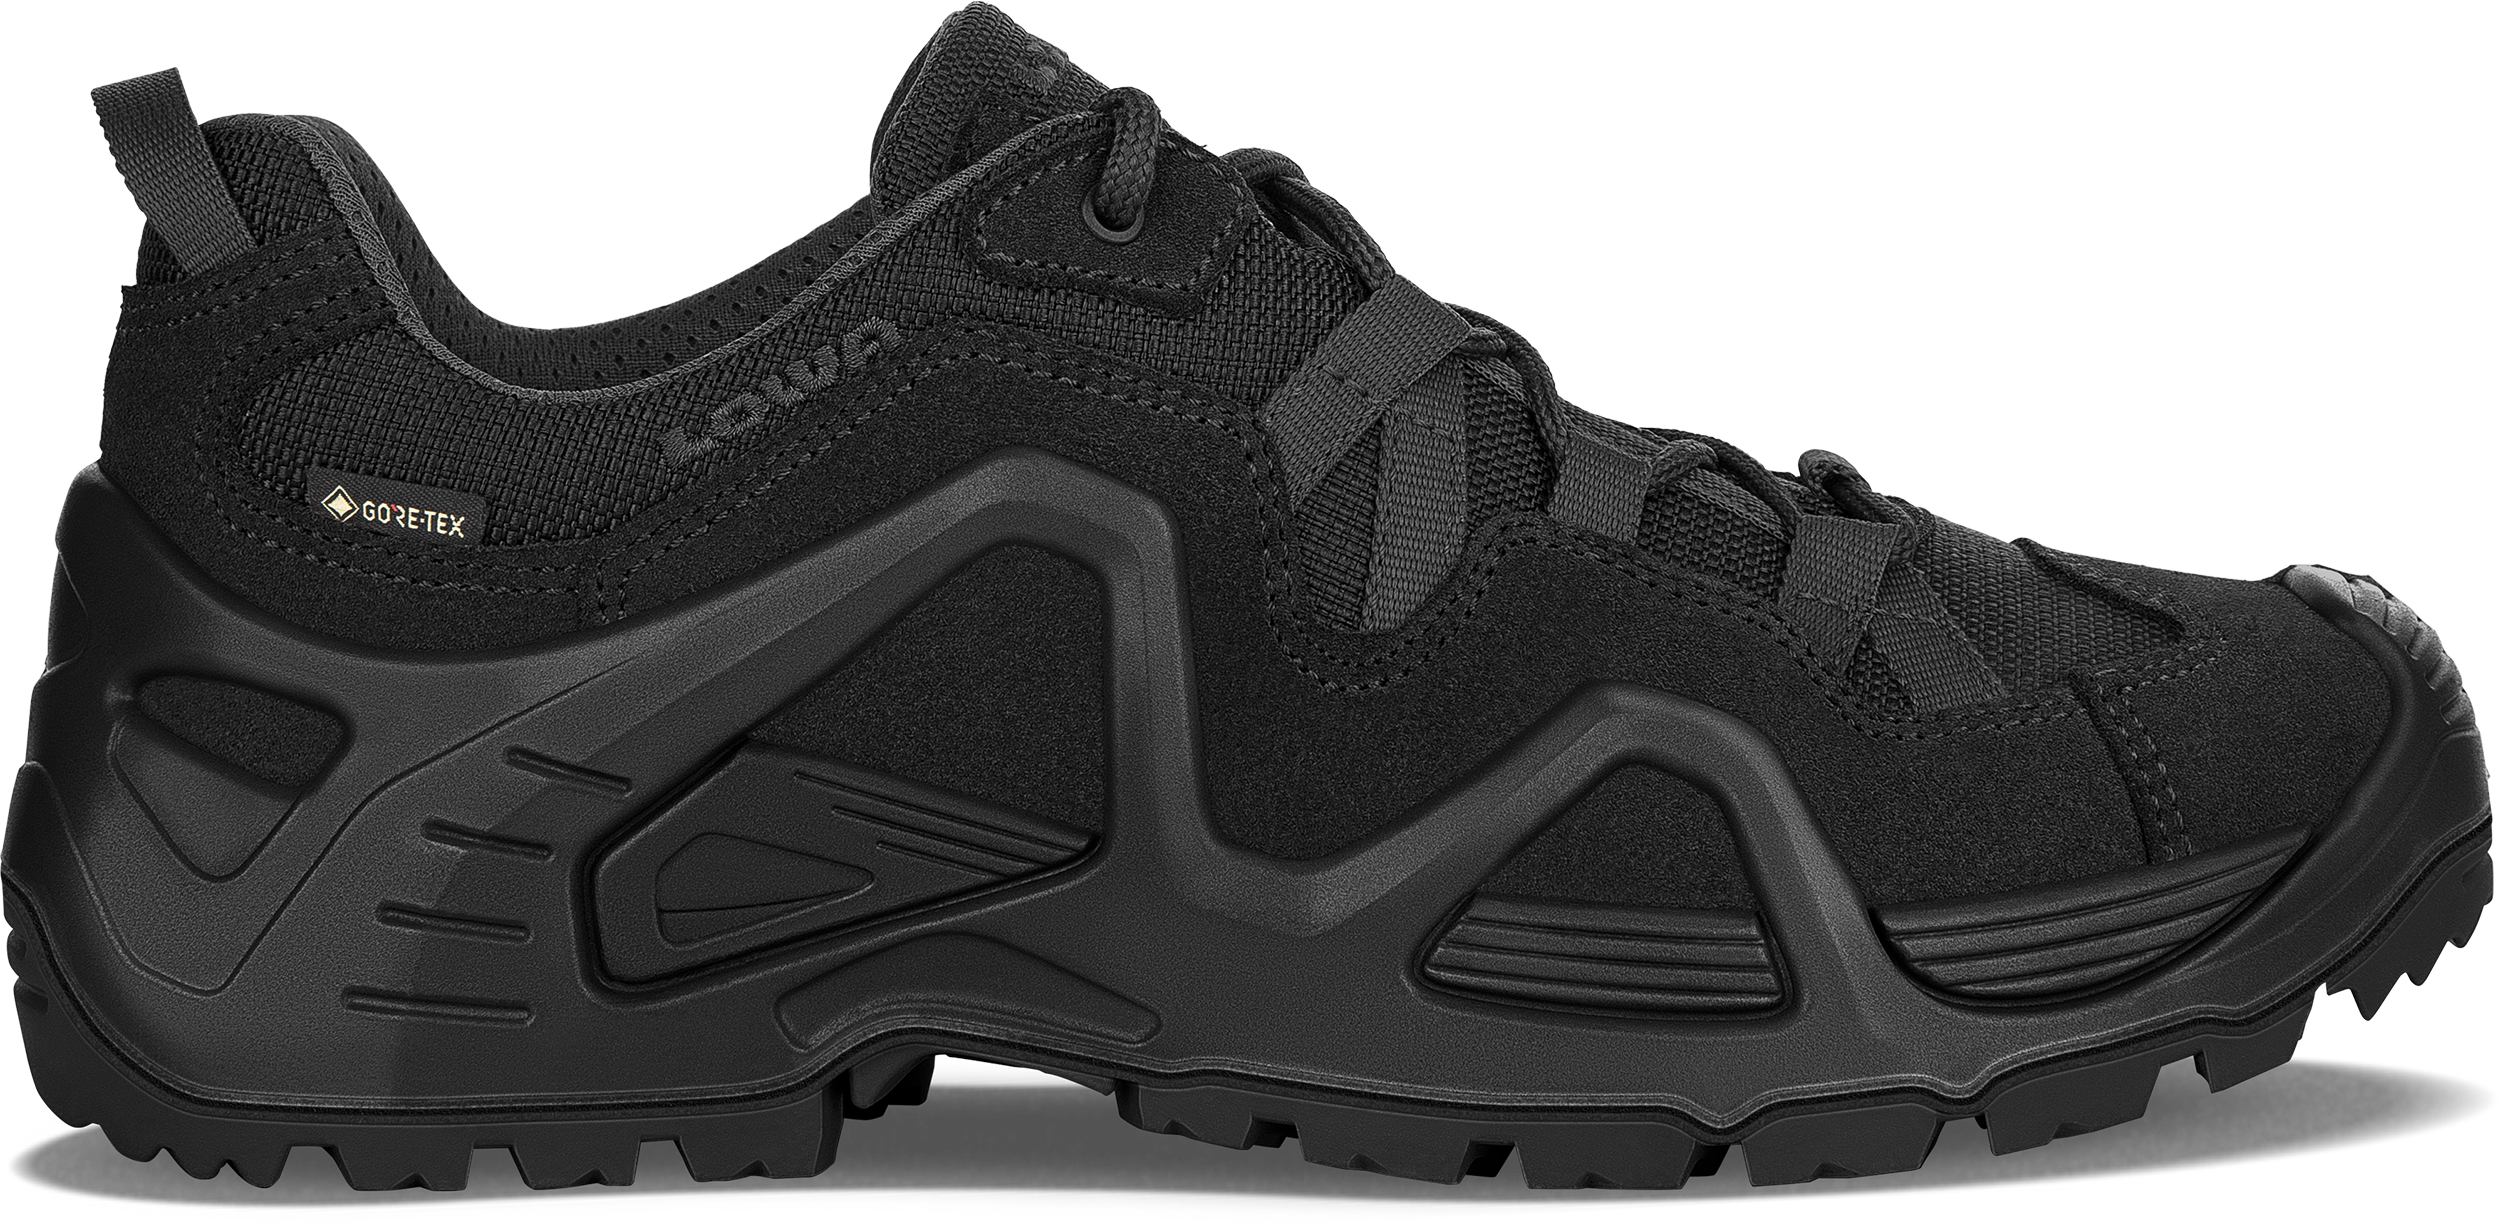 ZEPHYR GTX LO TF Ws: TASK FORCE: CLOSE-QUARTERS Shoes for Women | LOWA